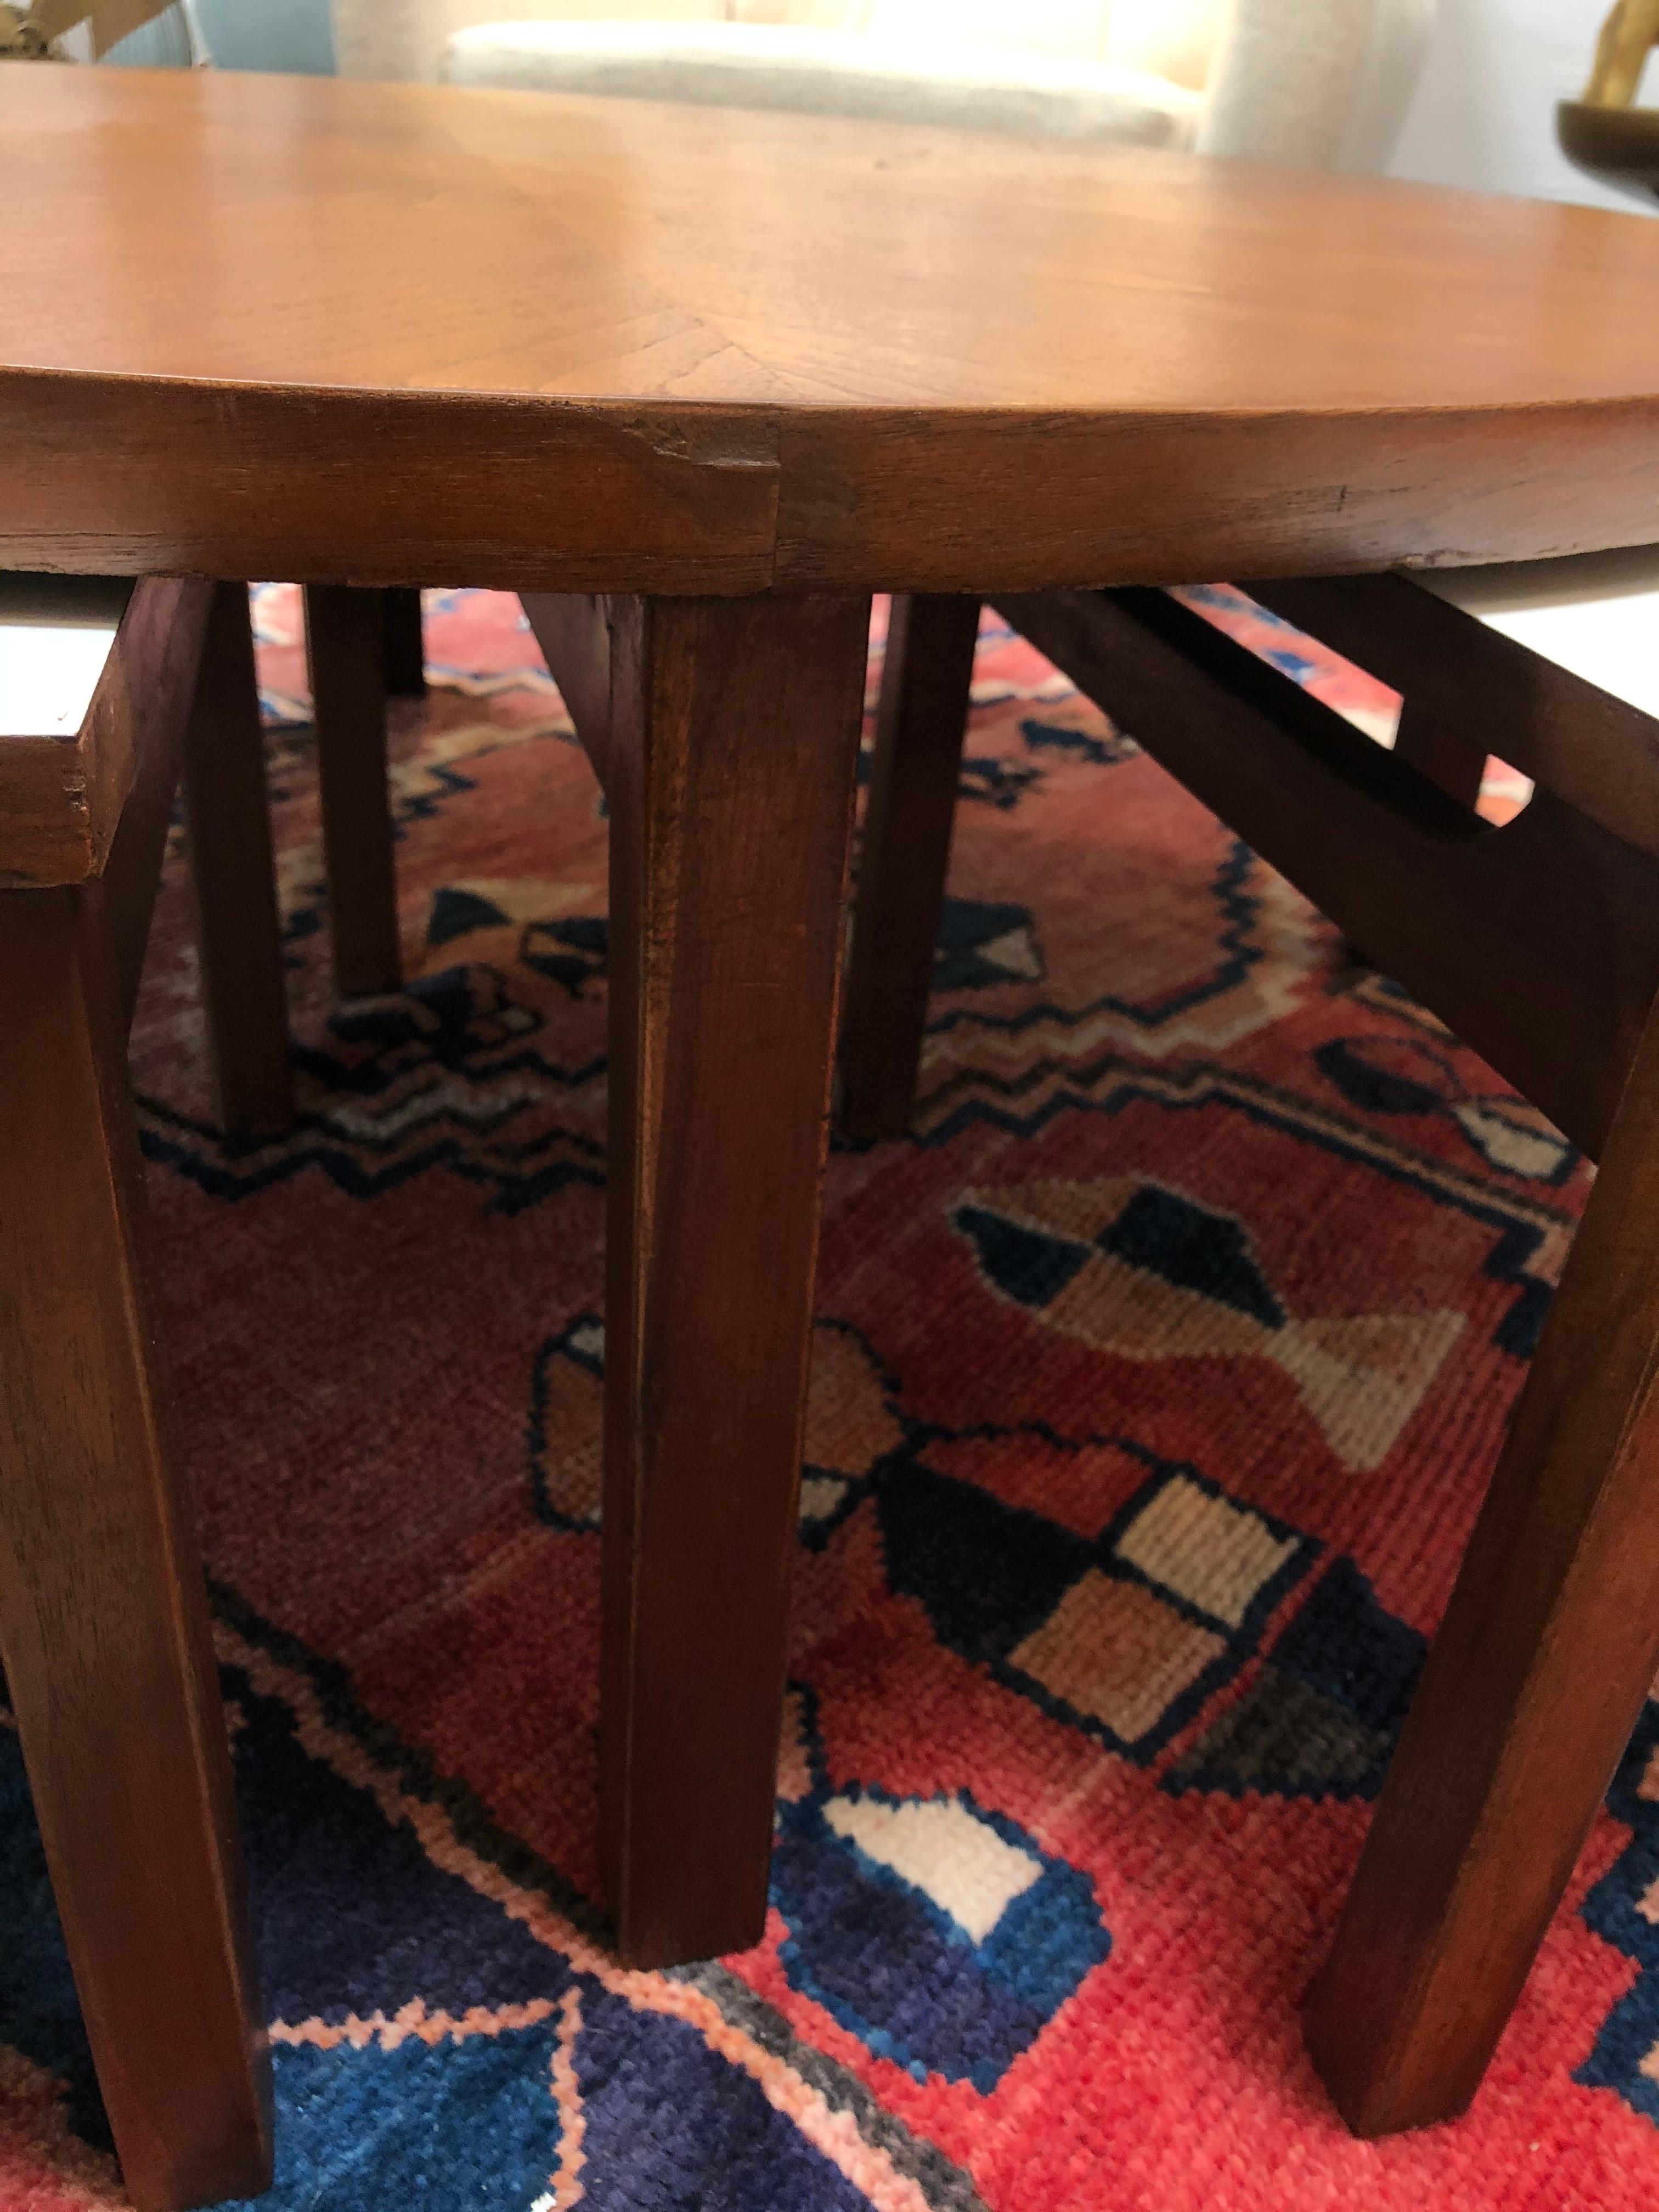 Midcentury round lane coffee table with small tables/stools that pull out from under table. All pieces fit cohesively under table. Table would be great for entertaining guests. 

Small tables/stools - 13